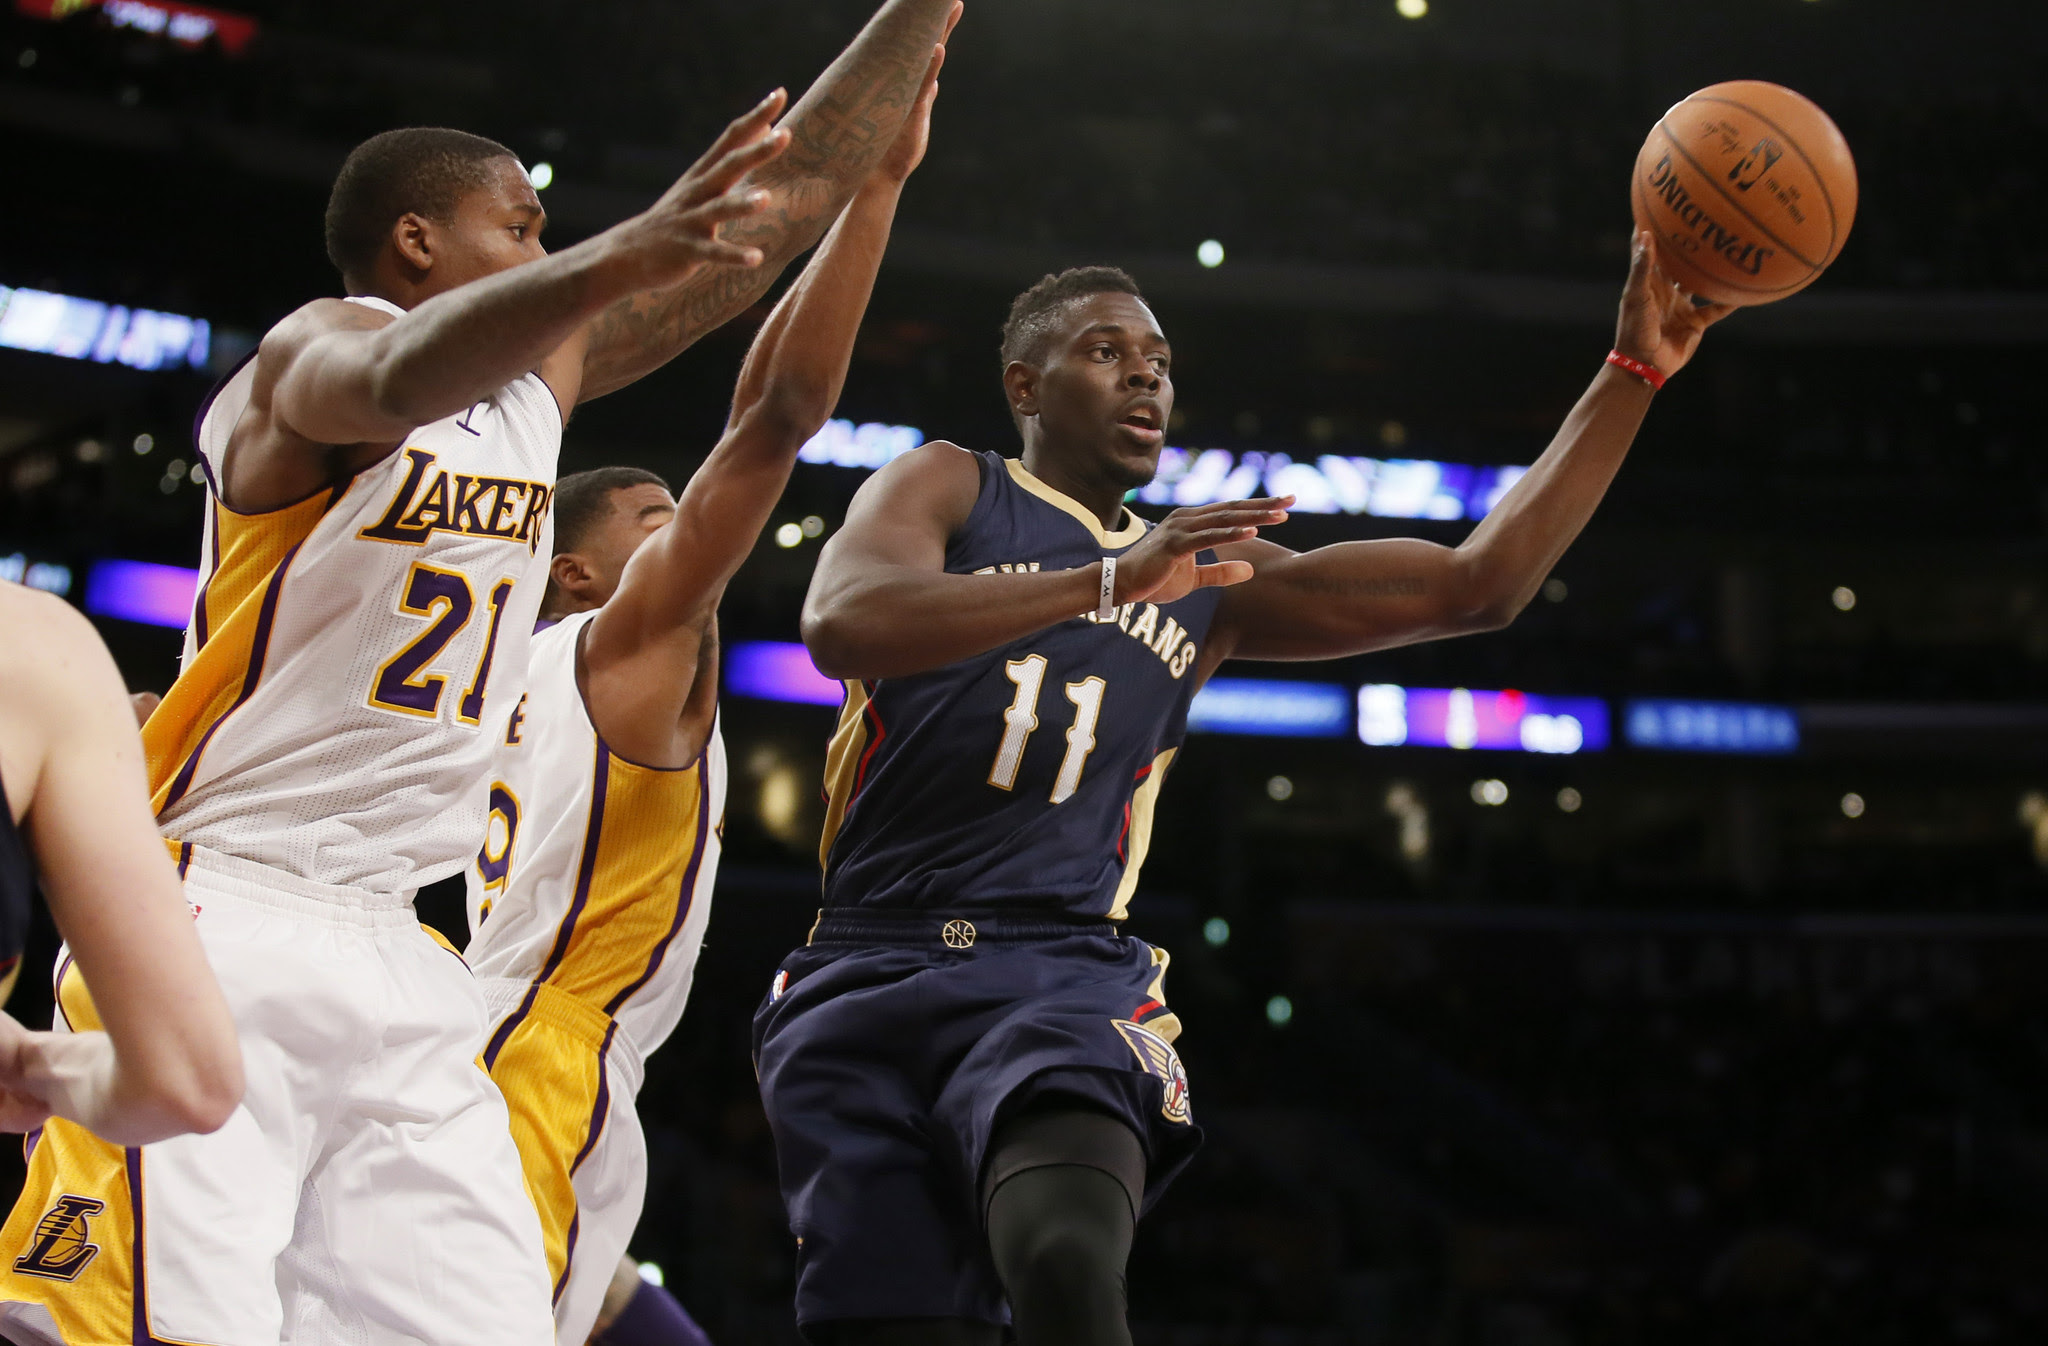 Lakers lose to New Orleans after making lineup changes